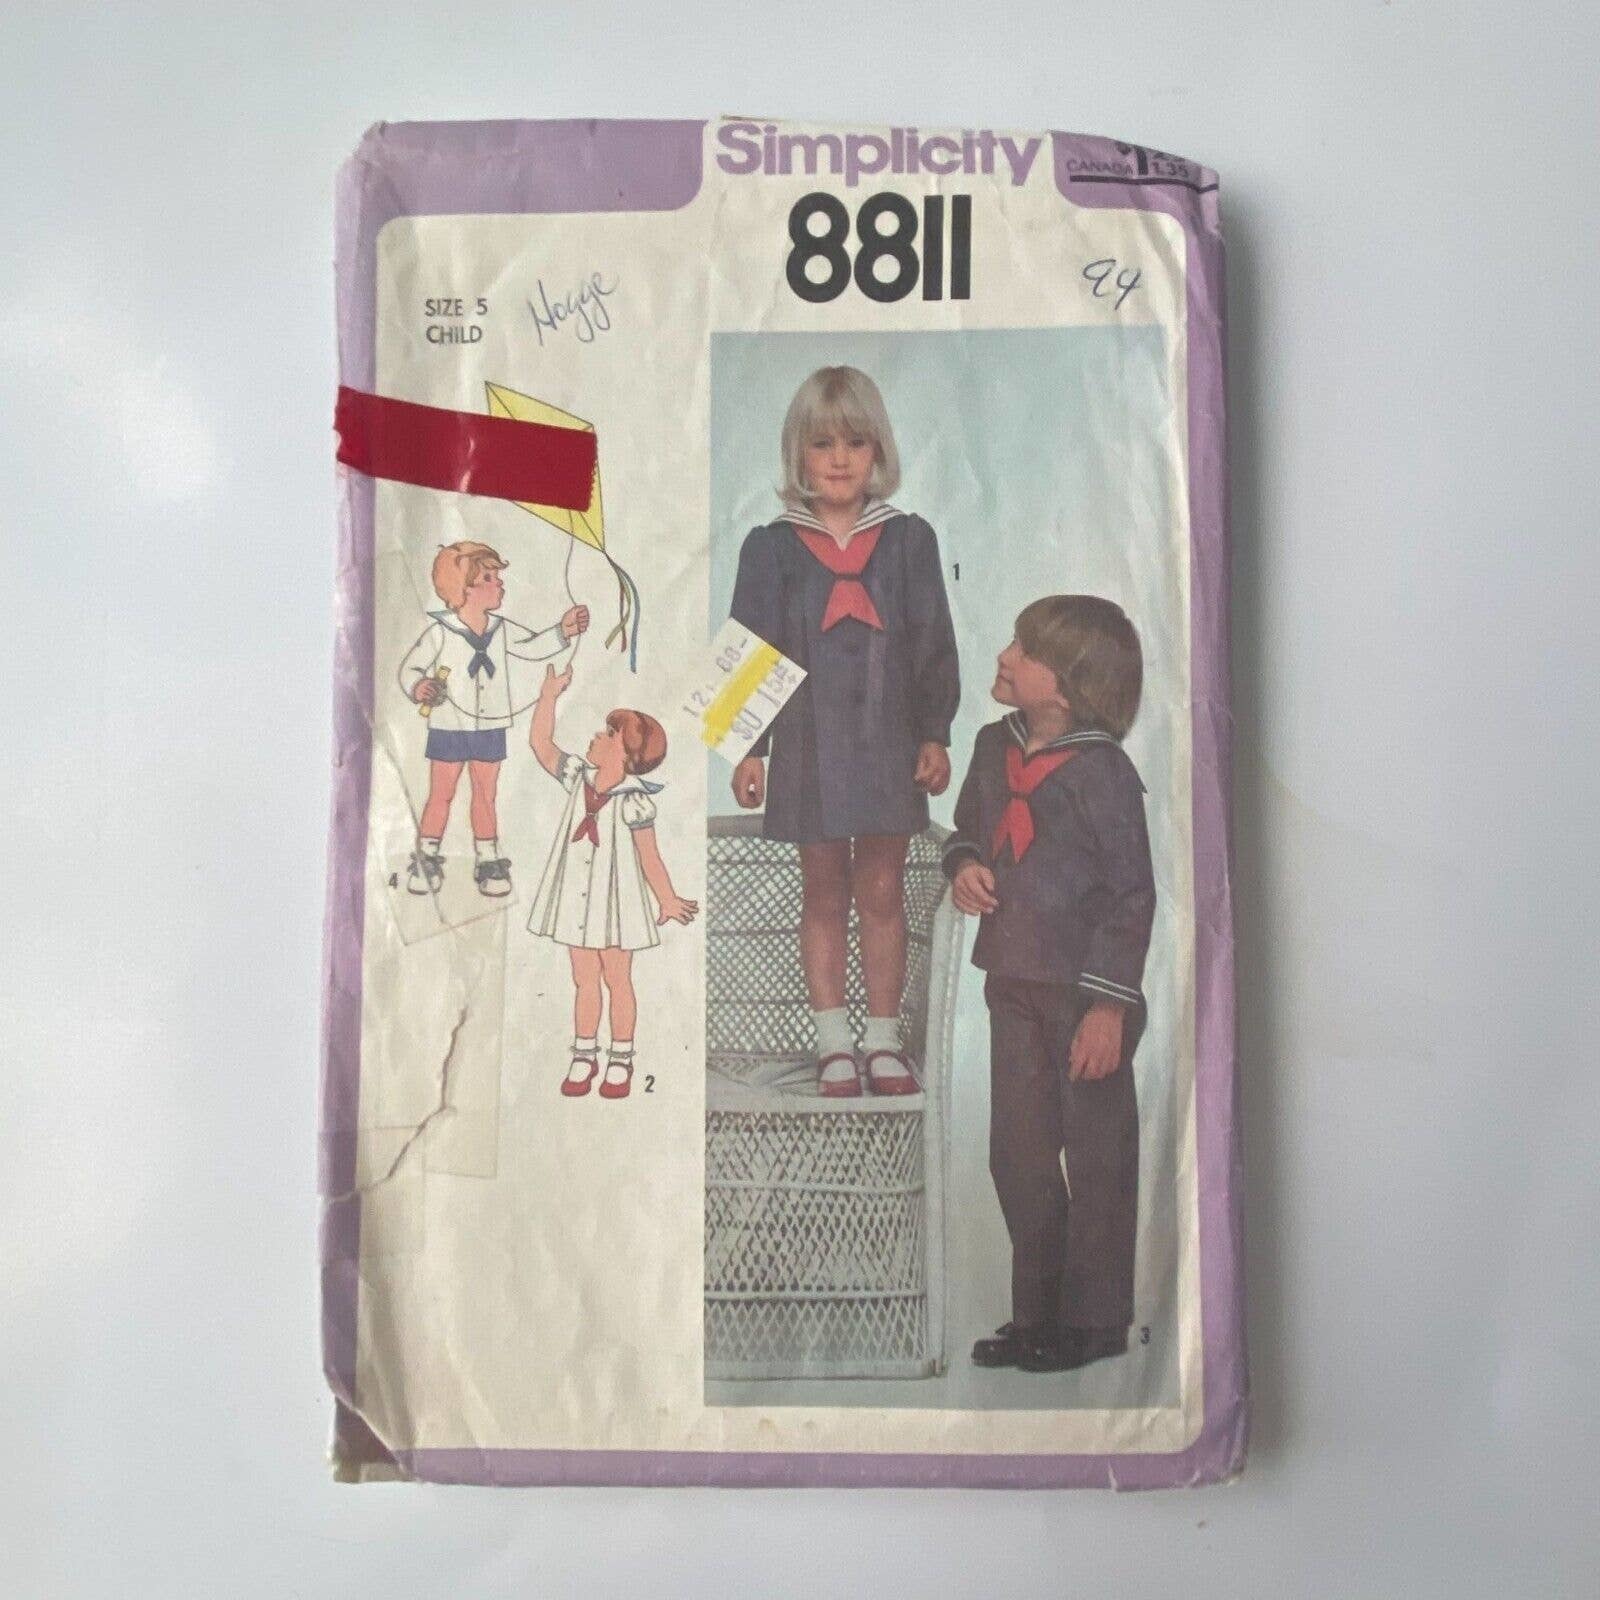 Primary image for Simplicity 8811 Sewing Pattern 1978 Size 5 Bust 24 Vintage Child Sailor Suit